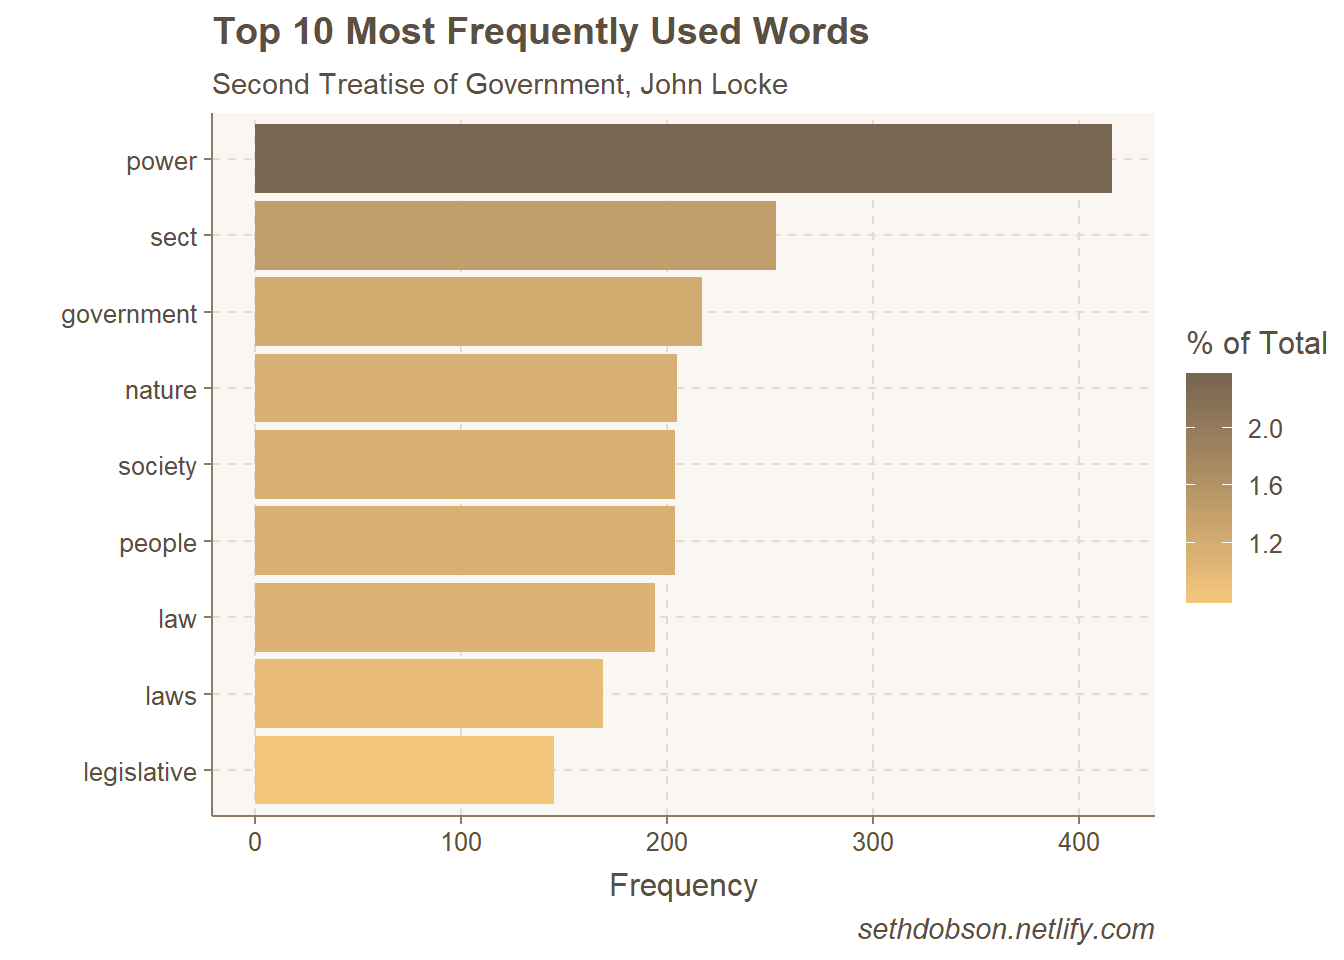 Top word frequencies, Second Treatise of Governemnt